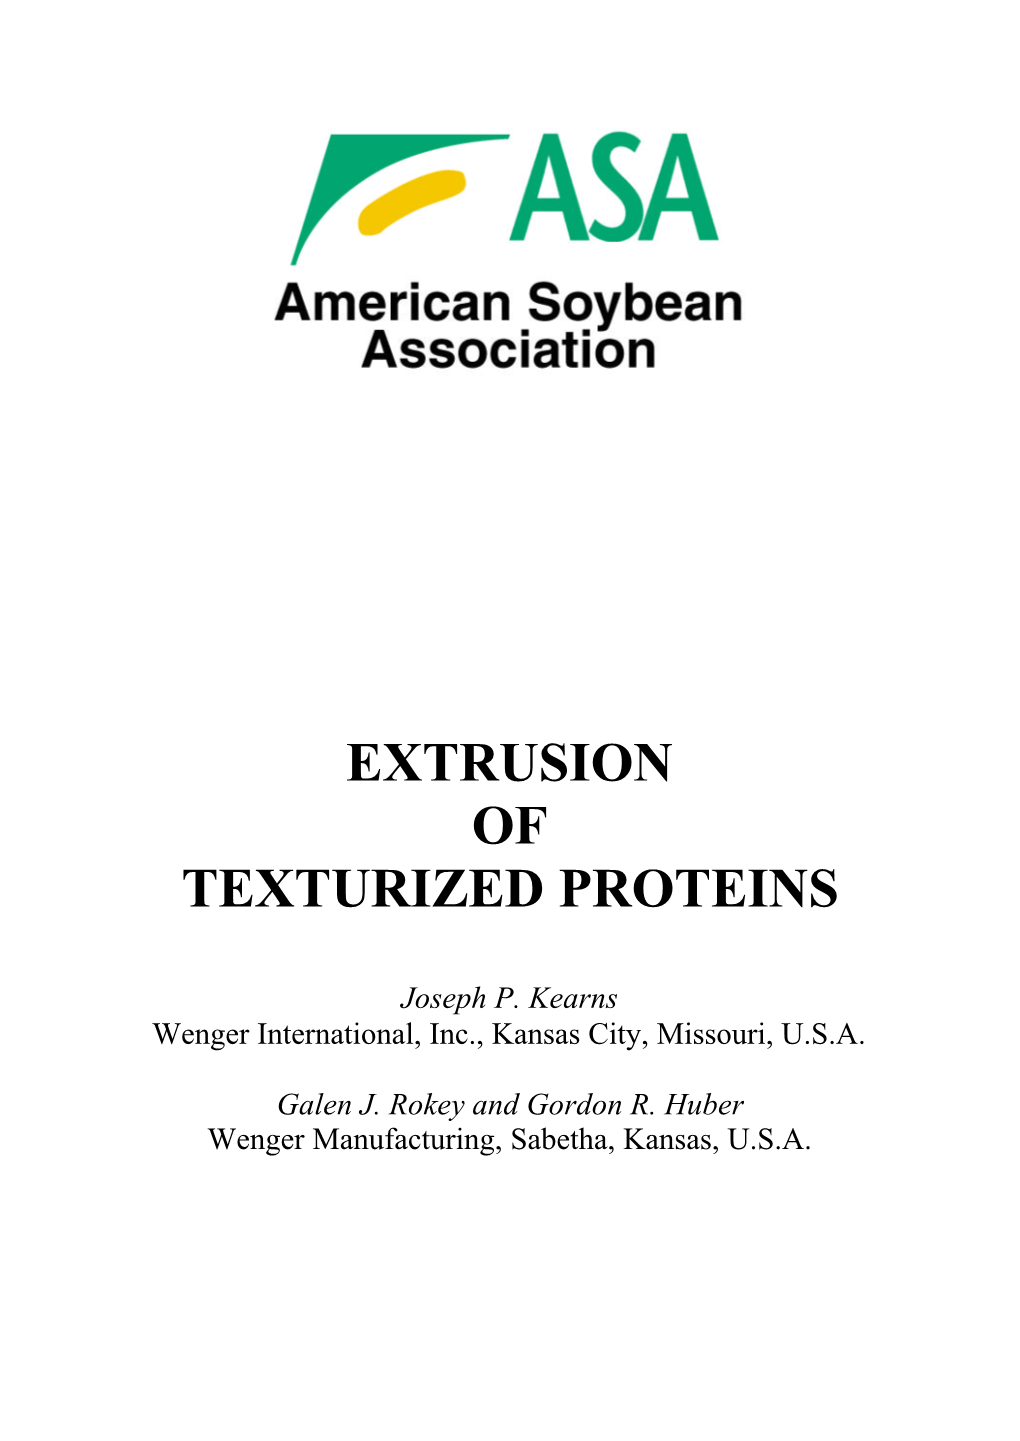 Extrusion of Texturized Proteins